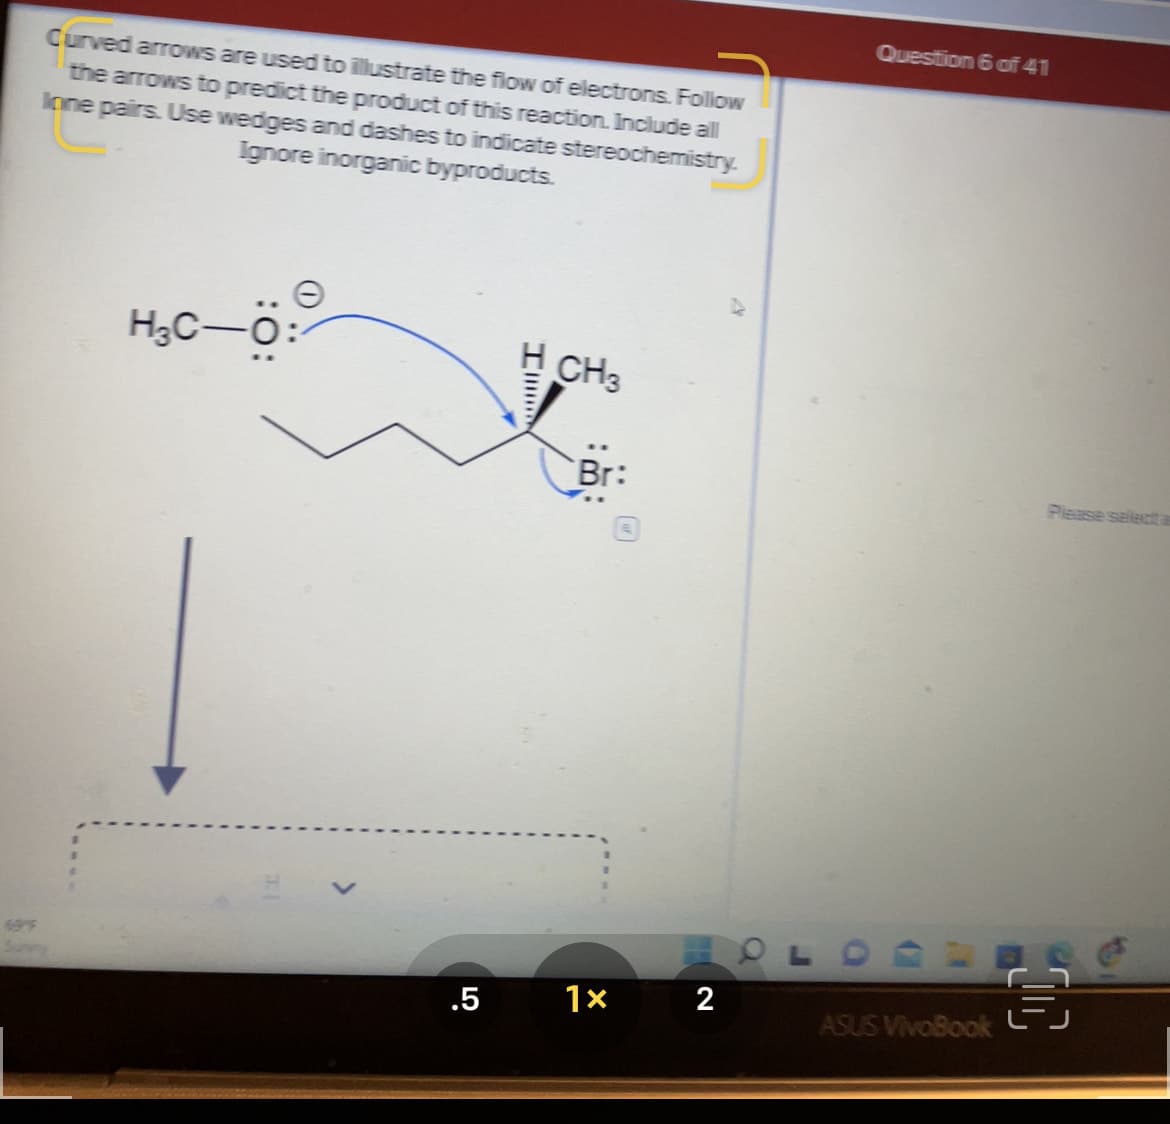 Question 6 of 41
Curved arrows are used to illustrate the flow of electrons. Folliow
the arrows to predict the product of this reaction. Include all
Ione pairs. Use wedges and dashes to indicate stereochemistry.
Ignore inorganic byproducts.
H3C-
H CH3
Br:
Please select a
69
2
.5
ASUS VivoBook
:O:
